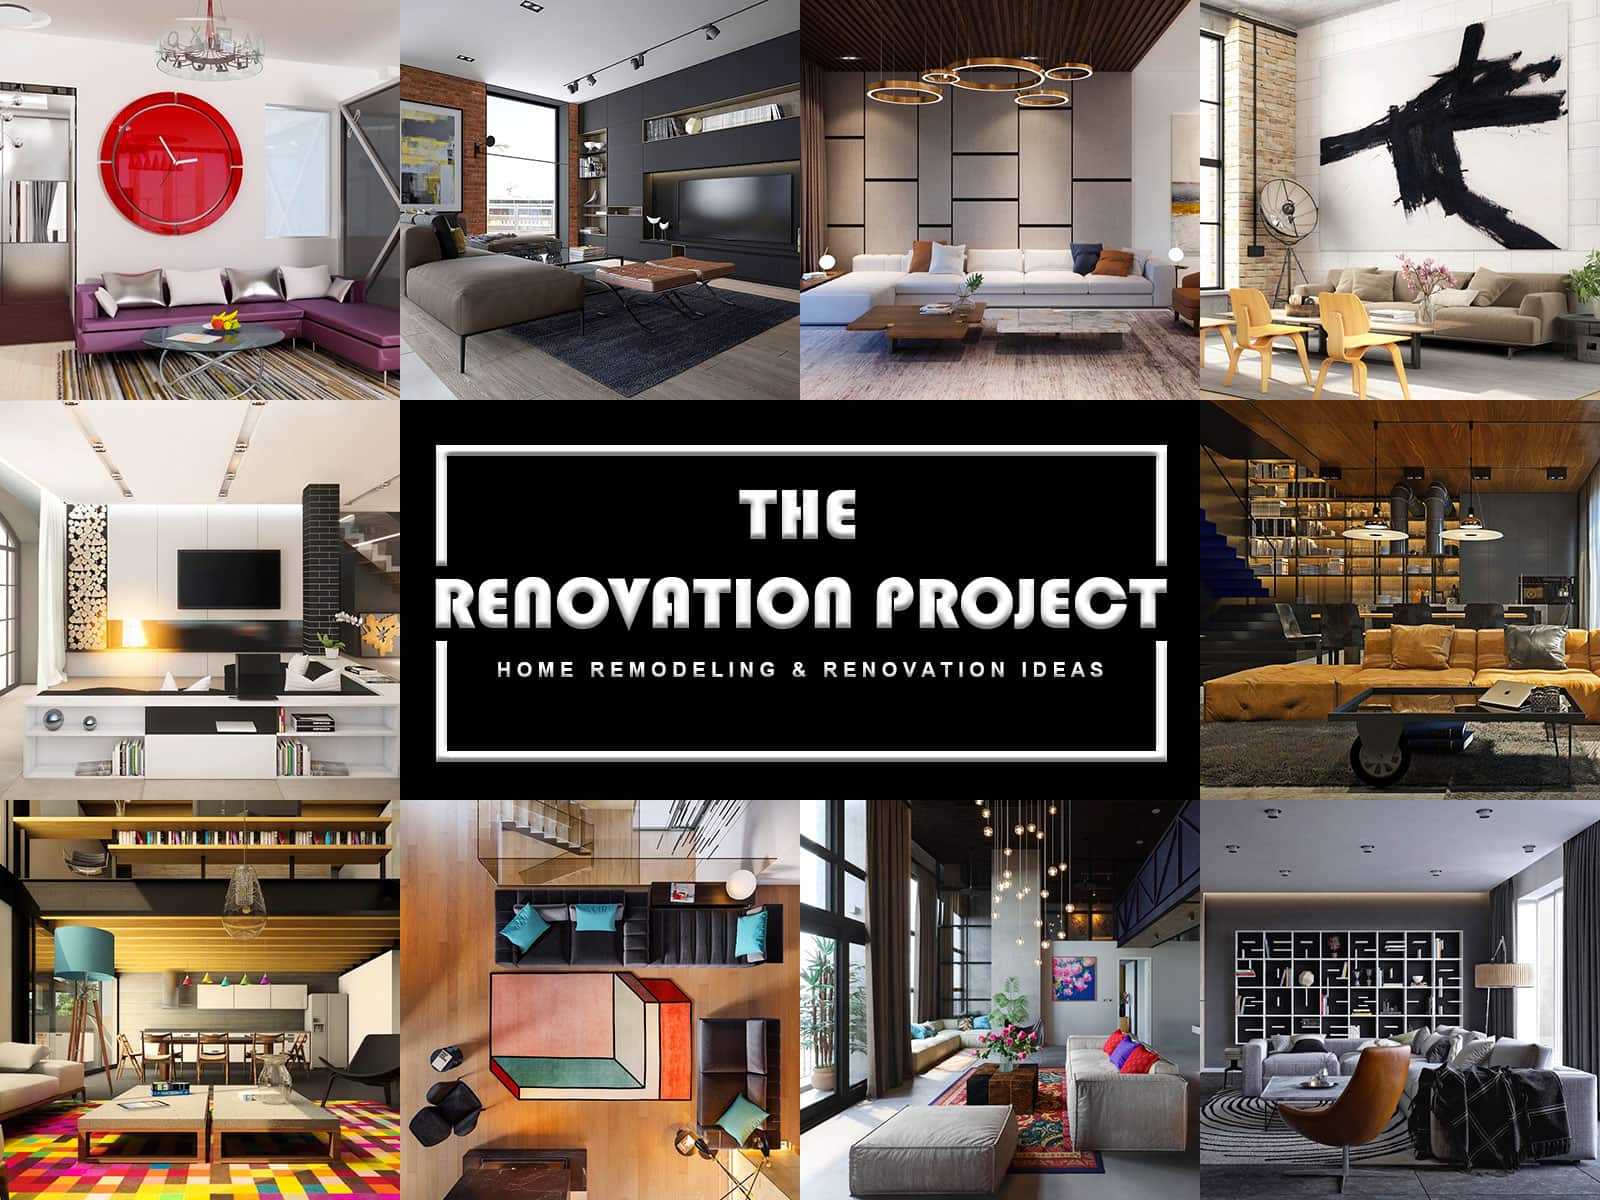 The Renovation Project